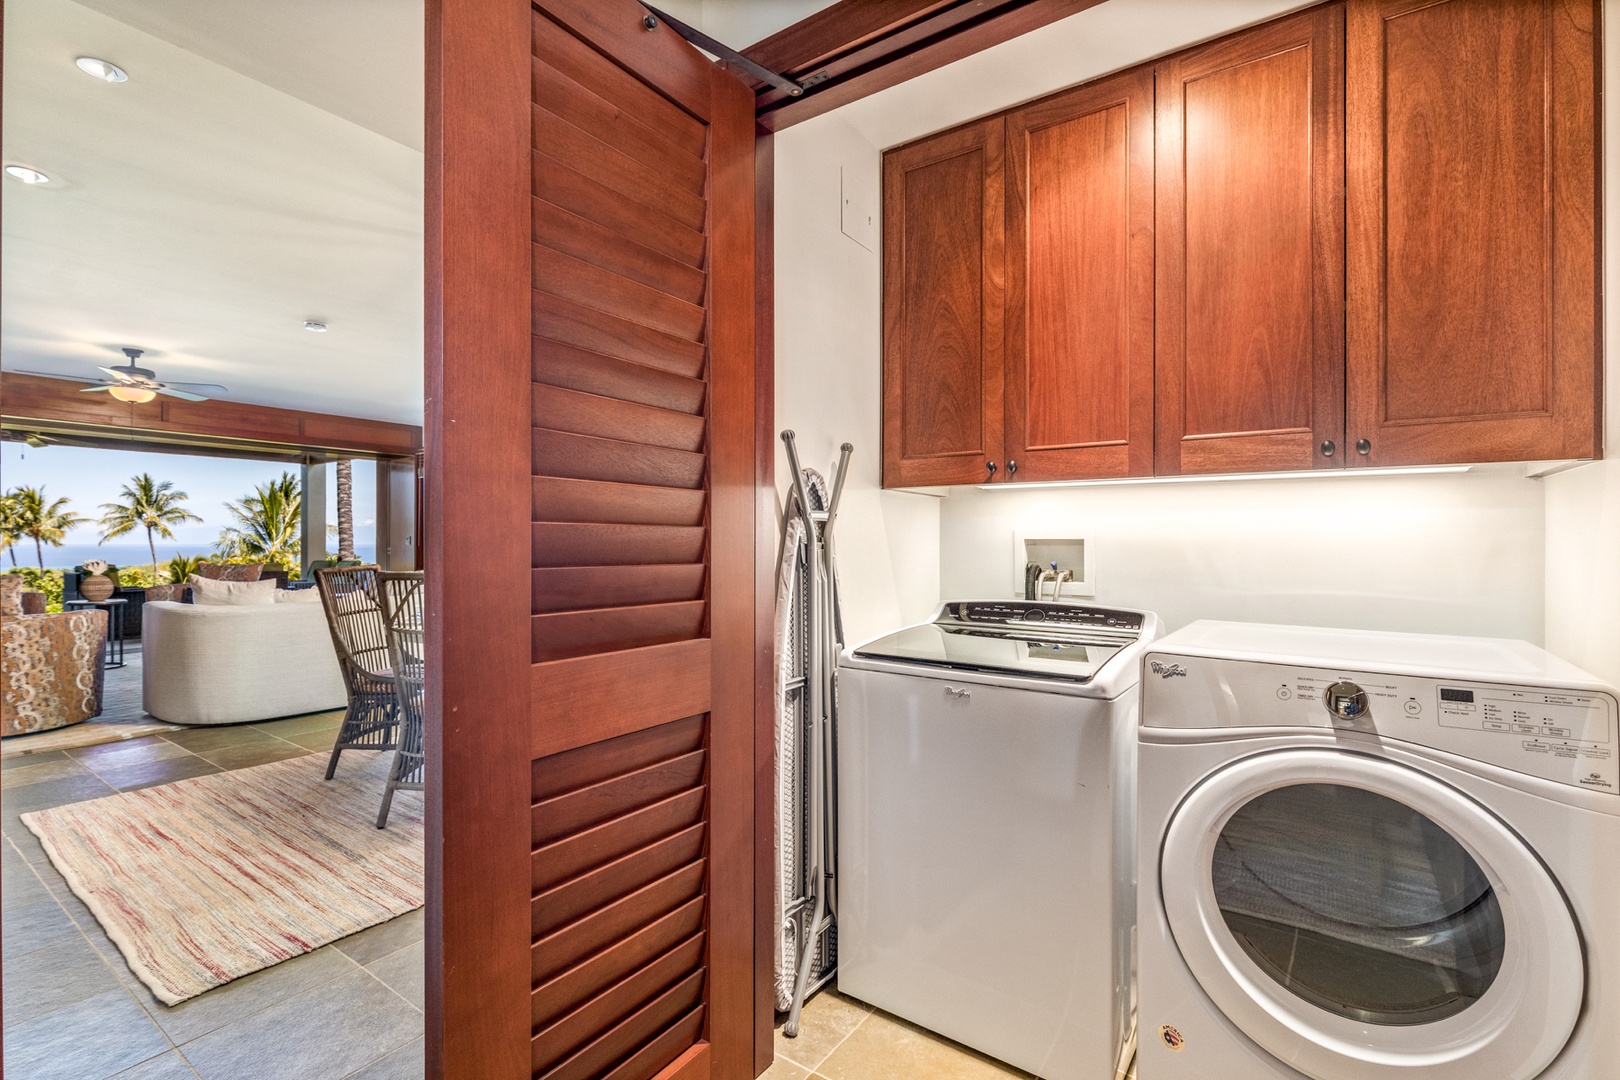 Kailua Kona Vacation Rentals, 3BD Hainoa Villa (2907C) at Four Seasons Resort at Hualalai - Dedicated laundry room with top tier washer/dryer and provided laundry detergent